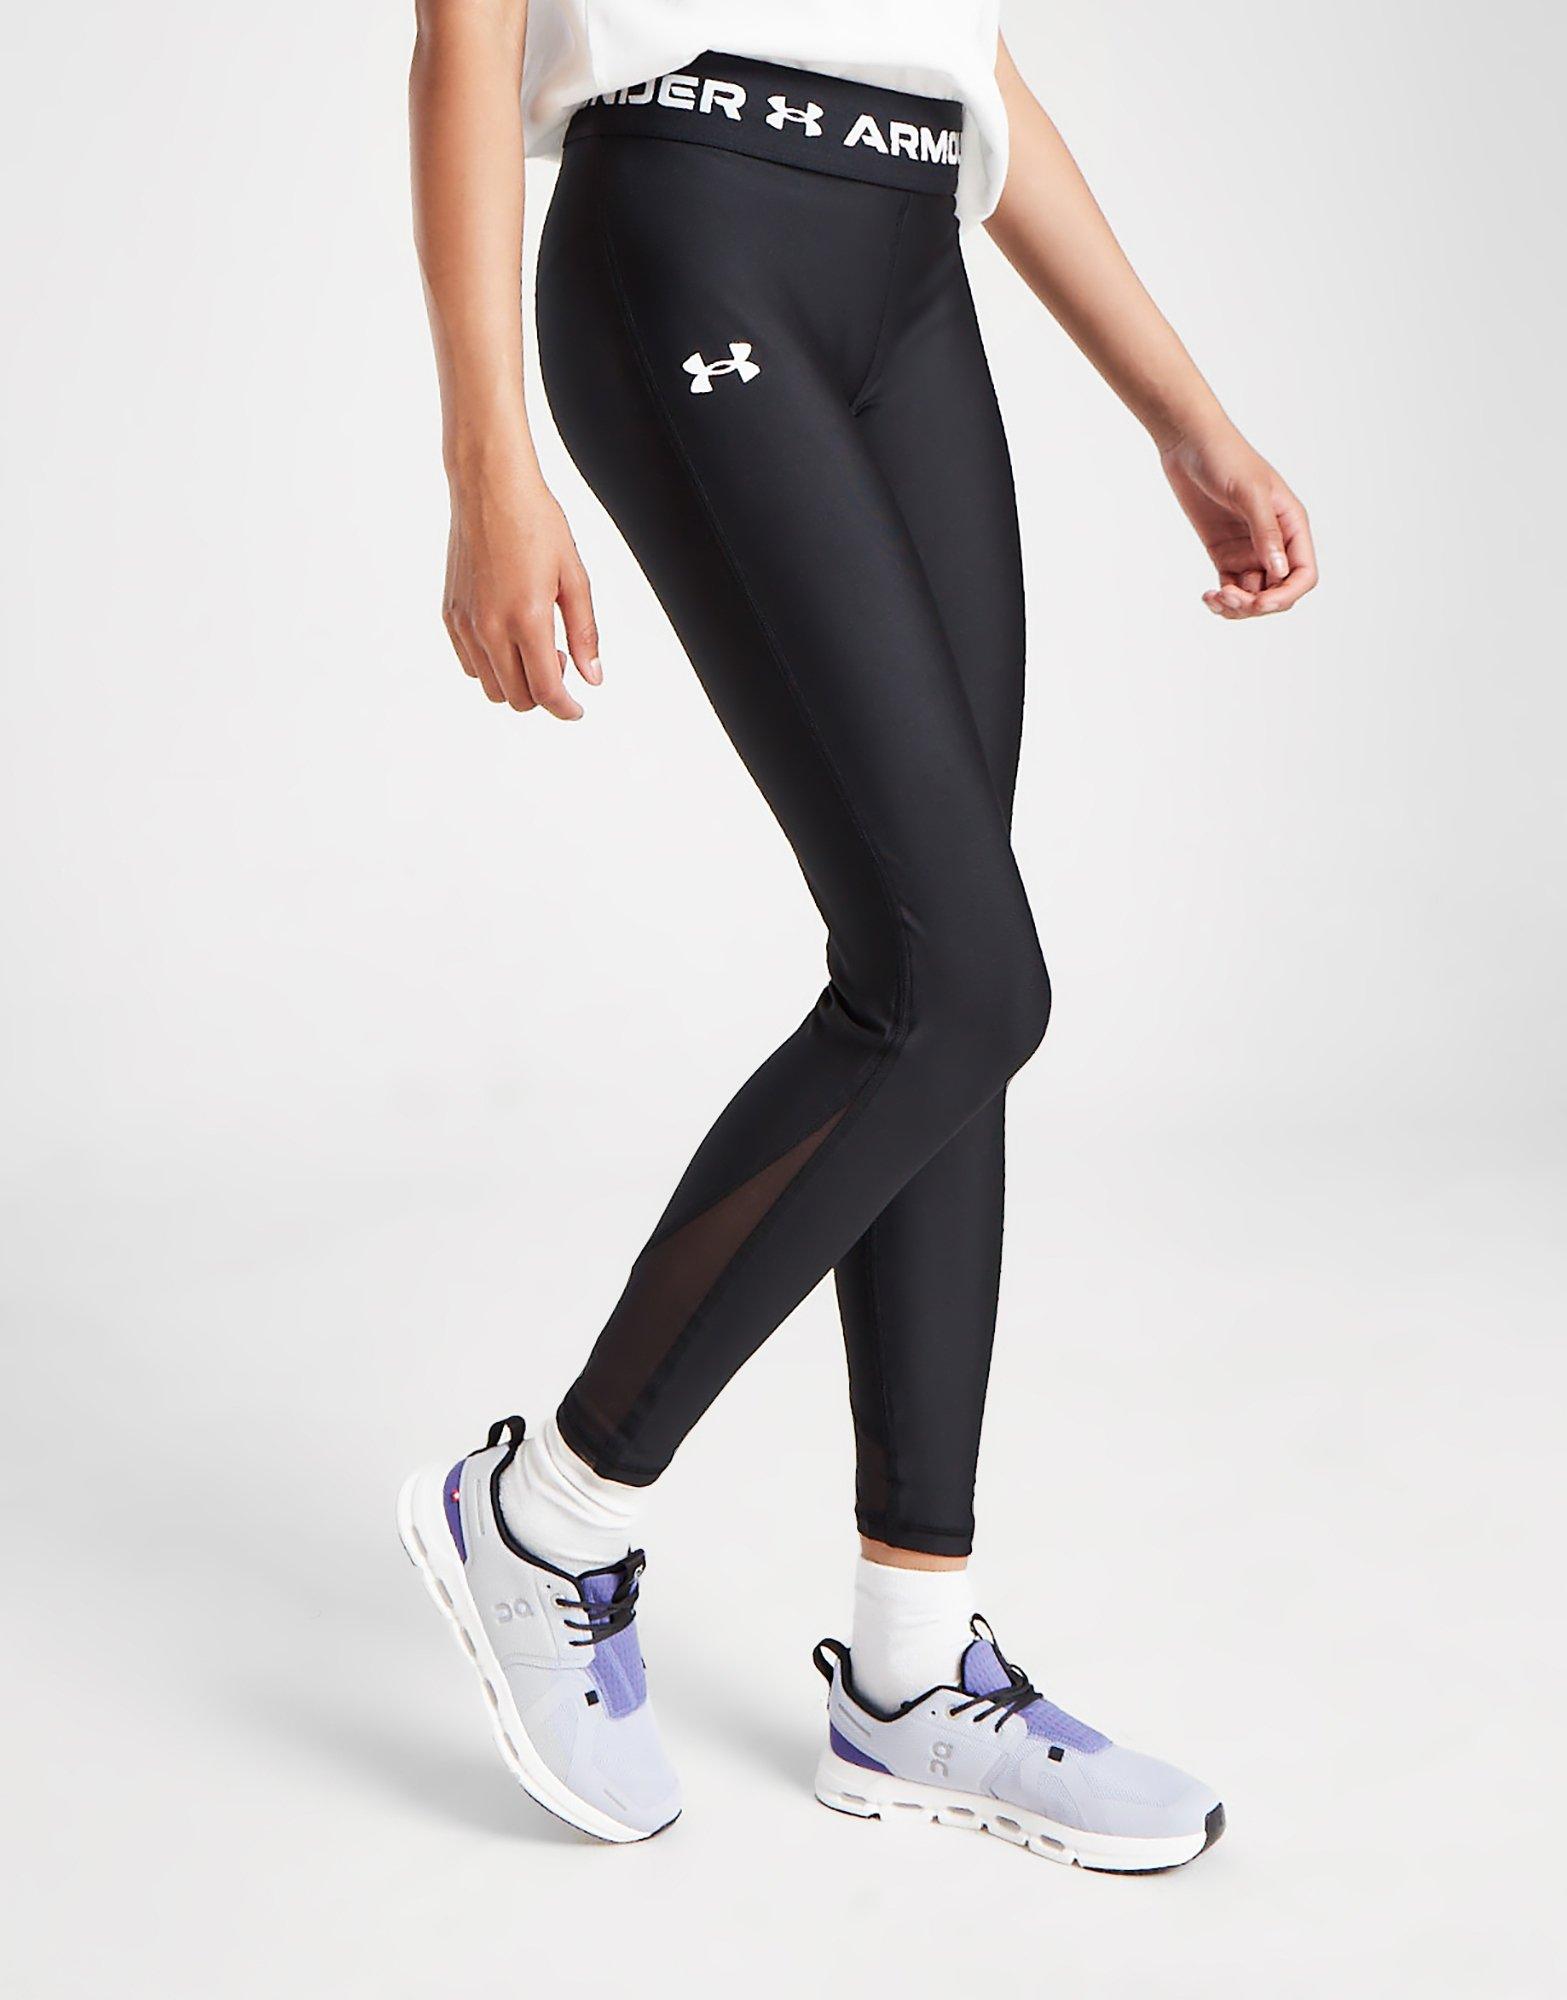 Black Under Armour Girls' Fitness Armour Tights Junior - JD Sports